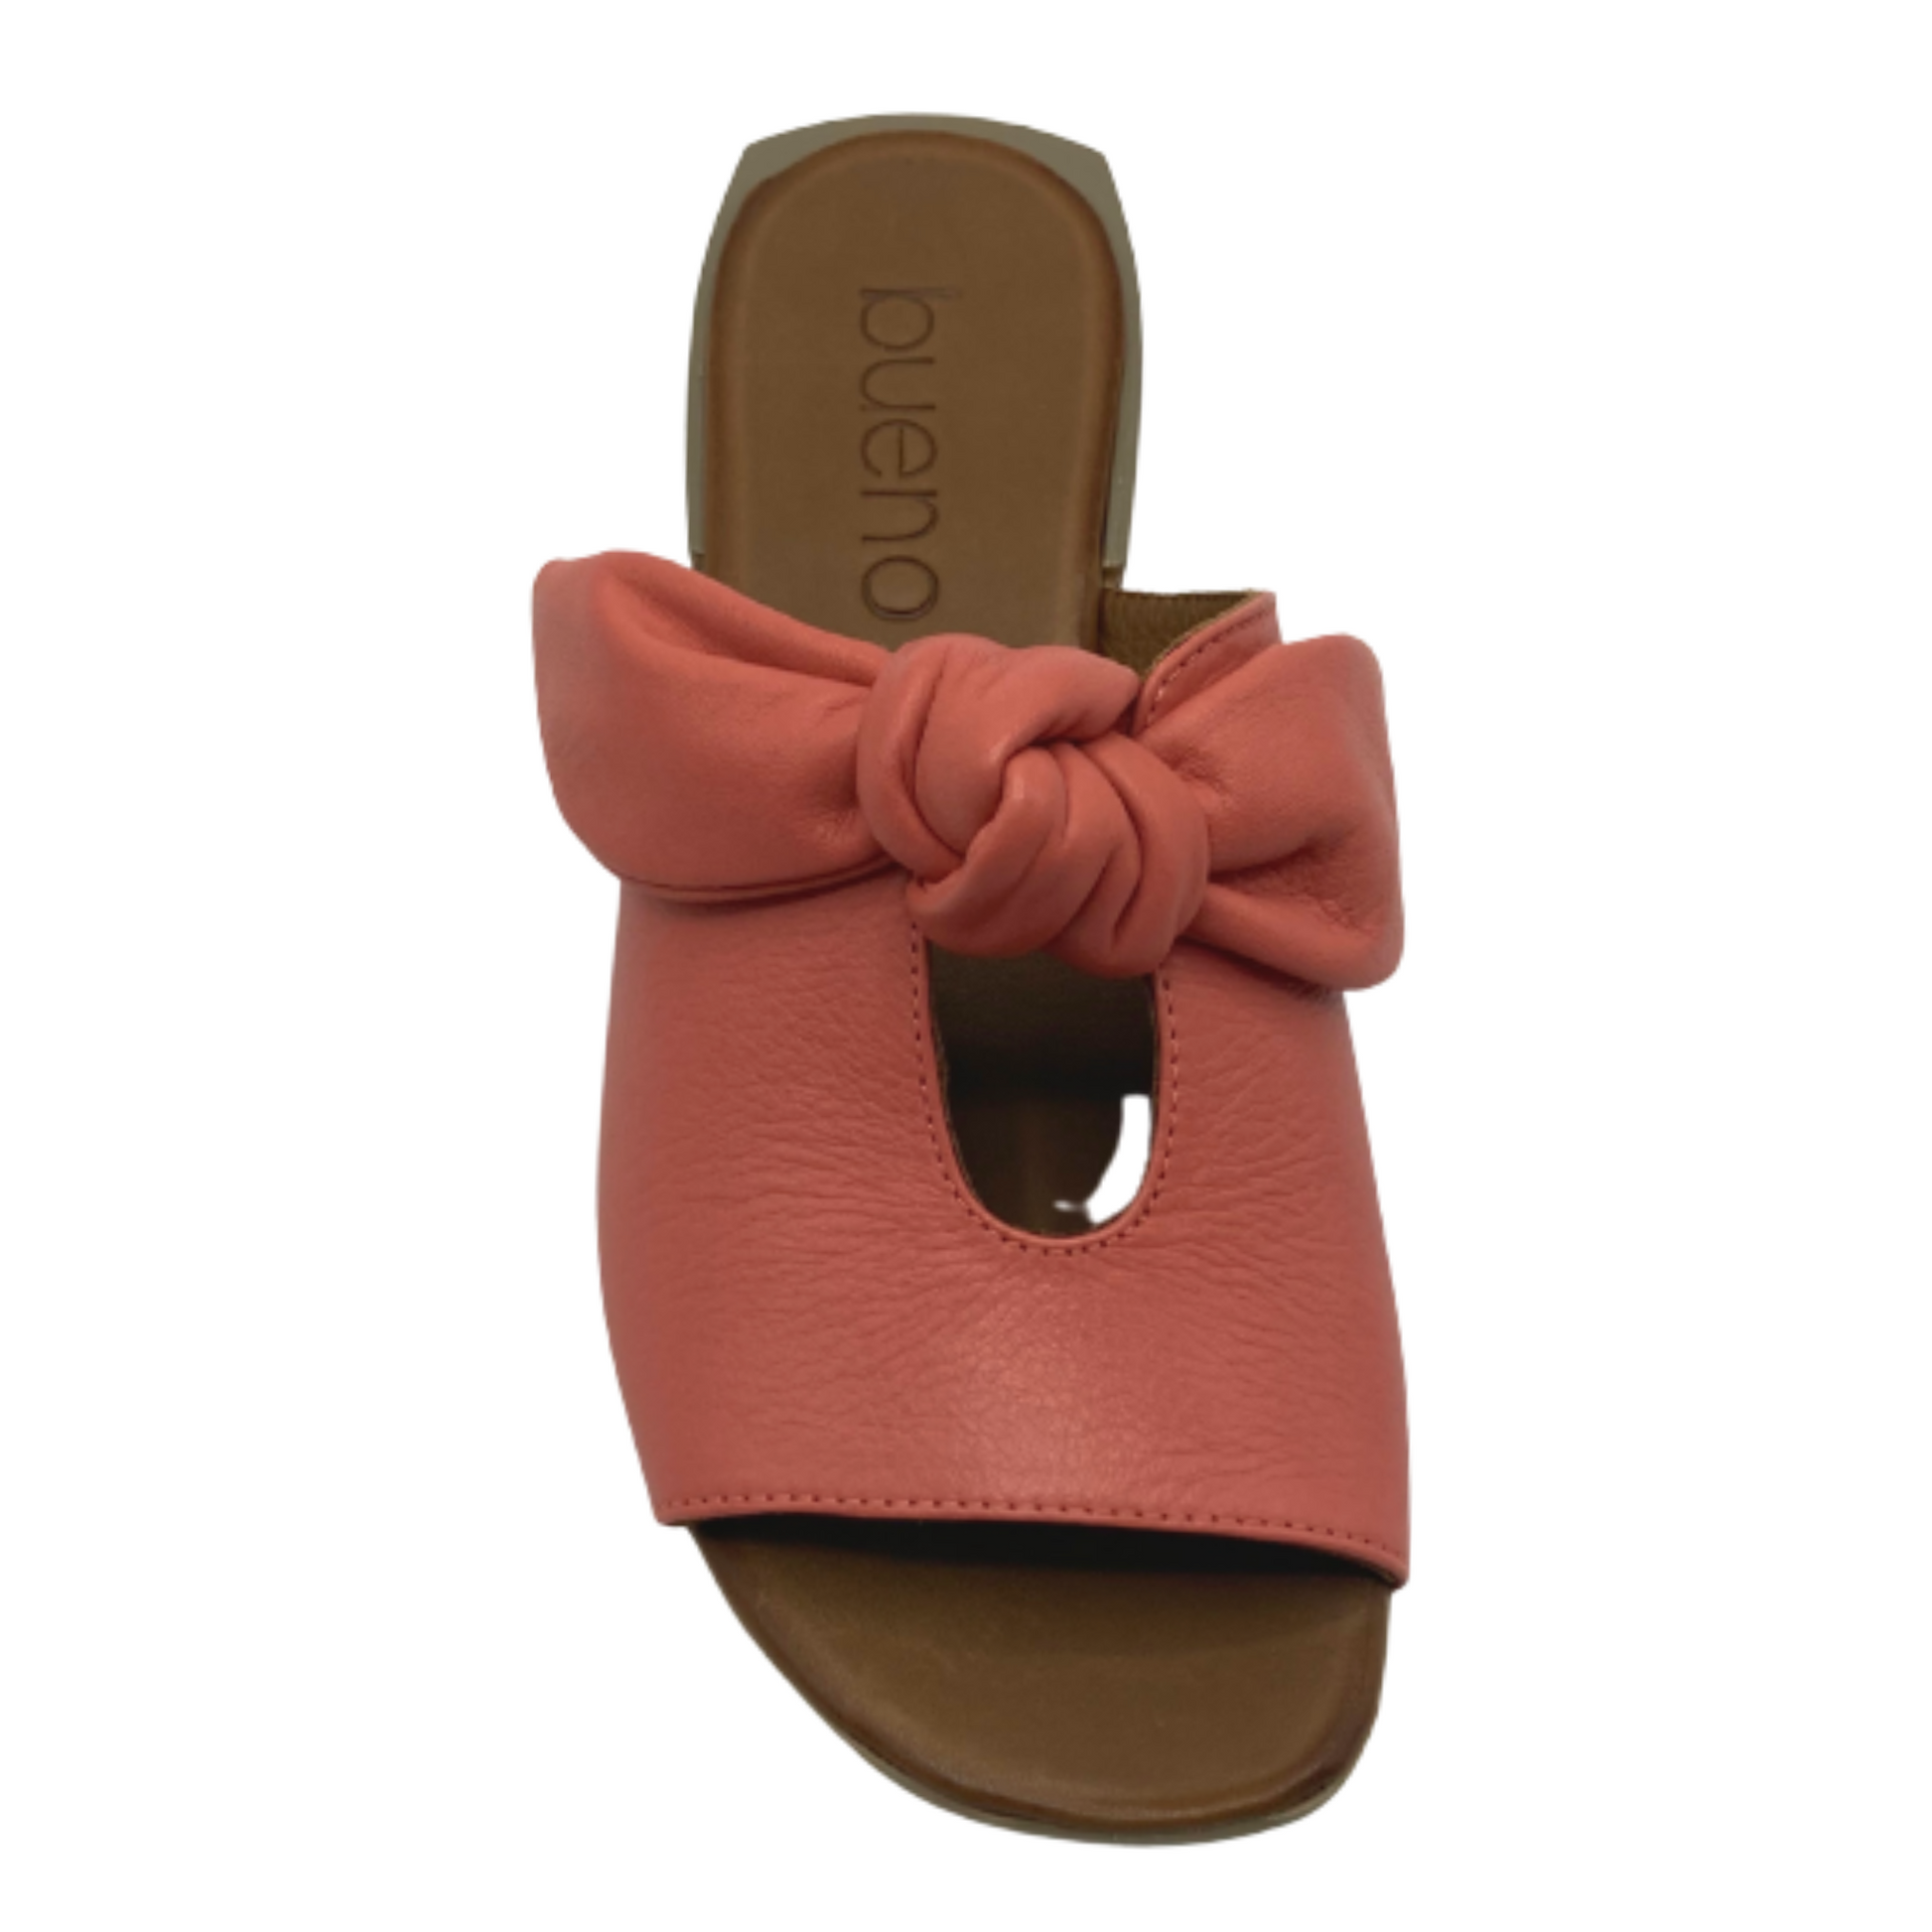 A coral keyhole cutout sandal with tied bow detail is pictured from the front with brown leather sole.